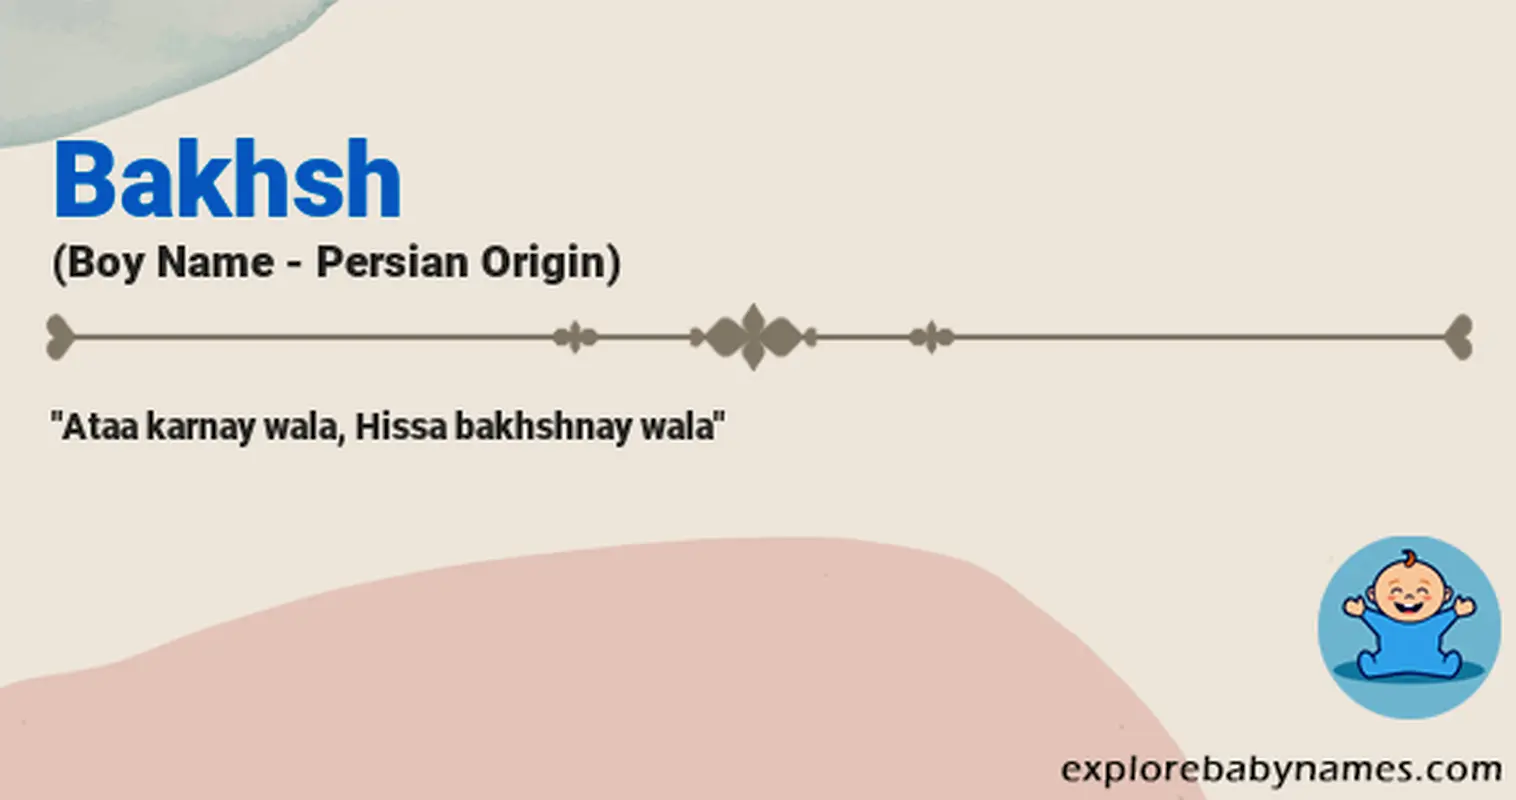 Meaning of Bakhsh